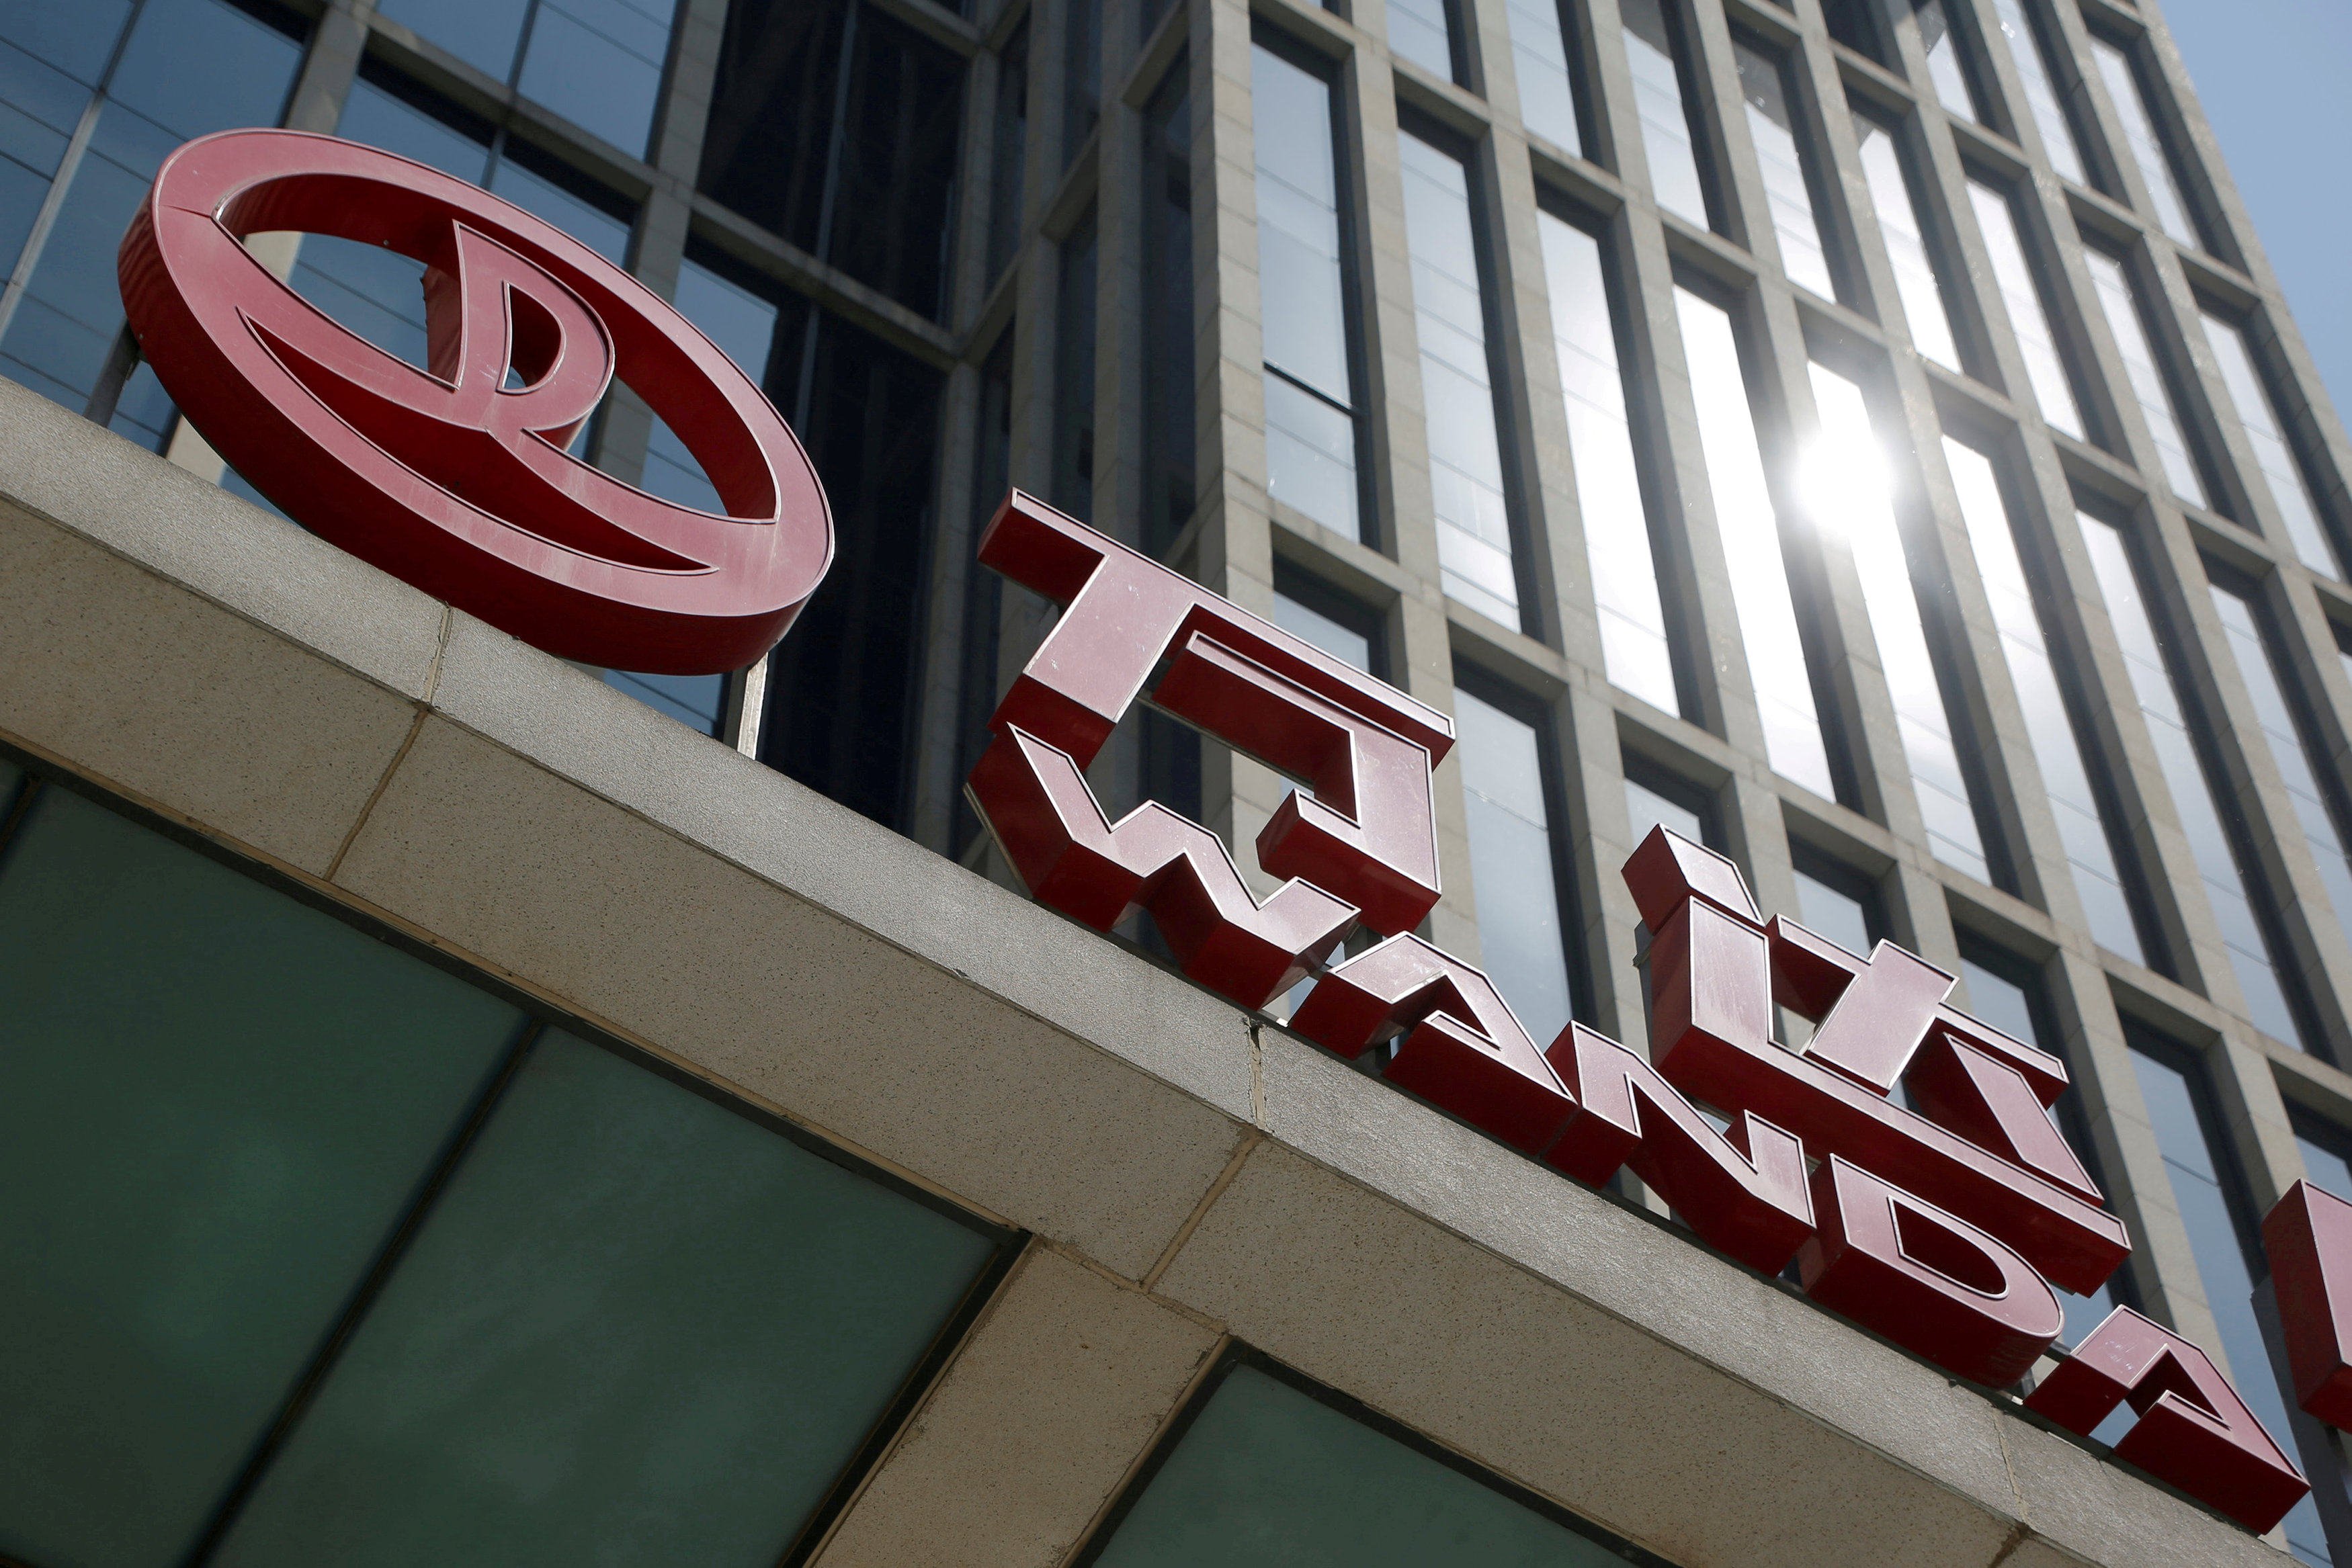 Dalian Wanda Group, China’s top commercial property developer, is mired in debt. Photo: Reuters